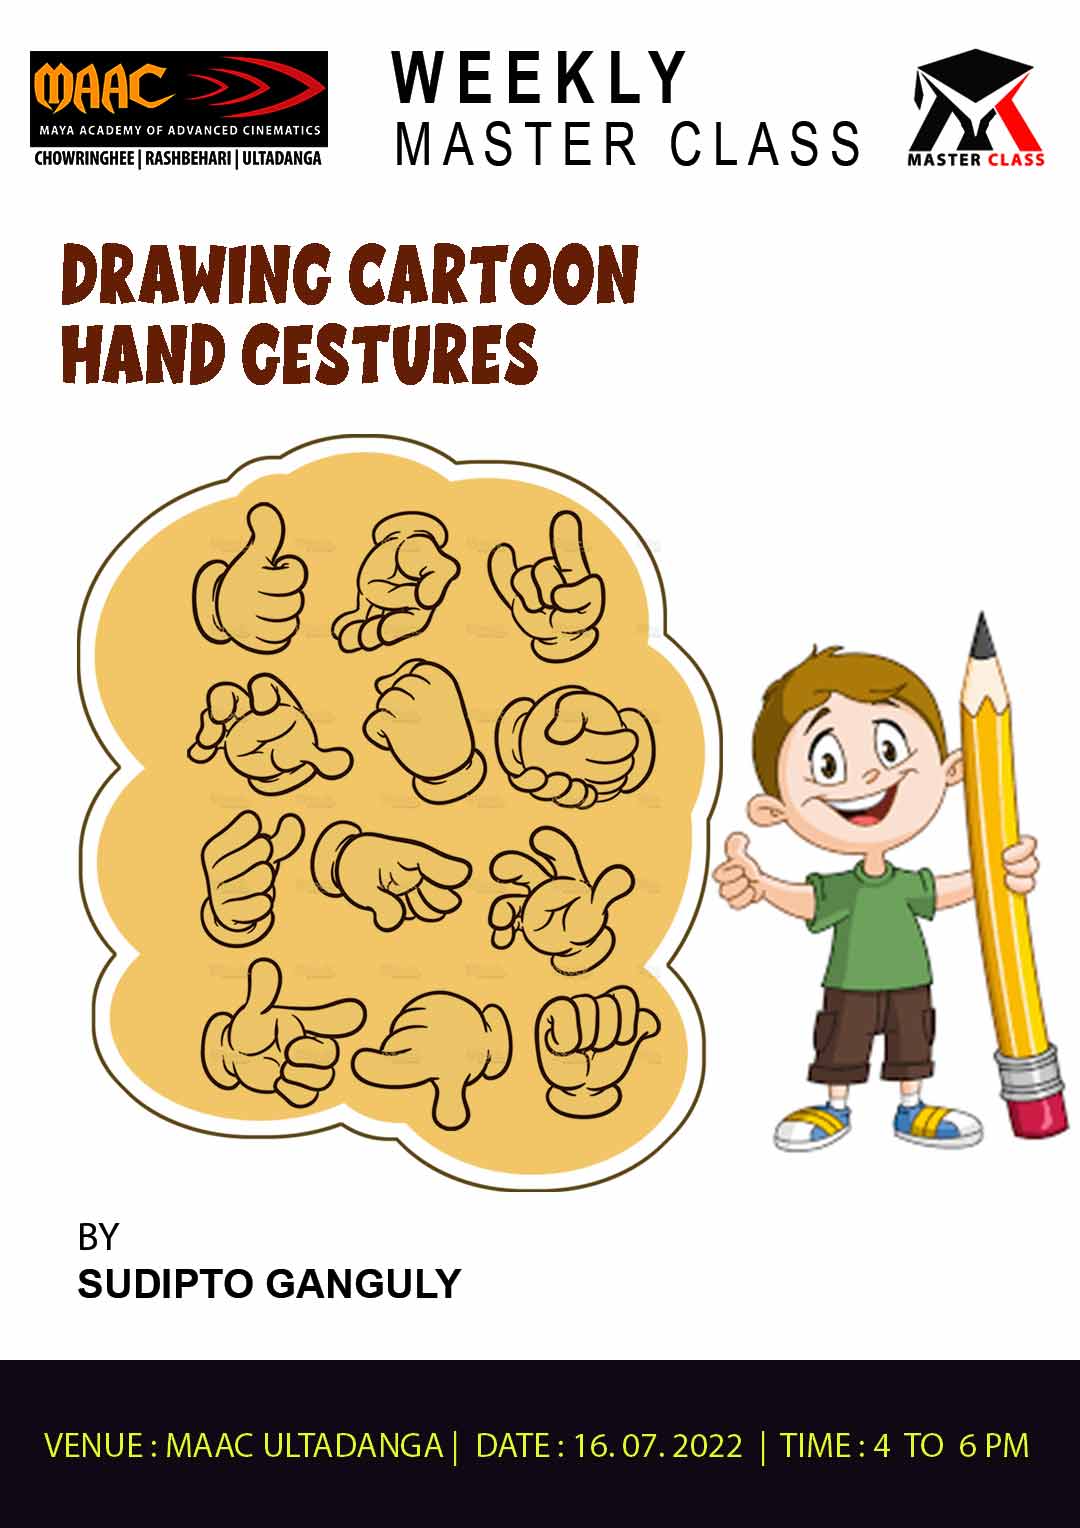 Weekly Master Class on Drawing Cartoon Hand Gesture